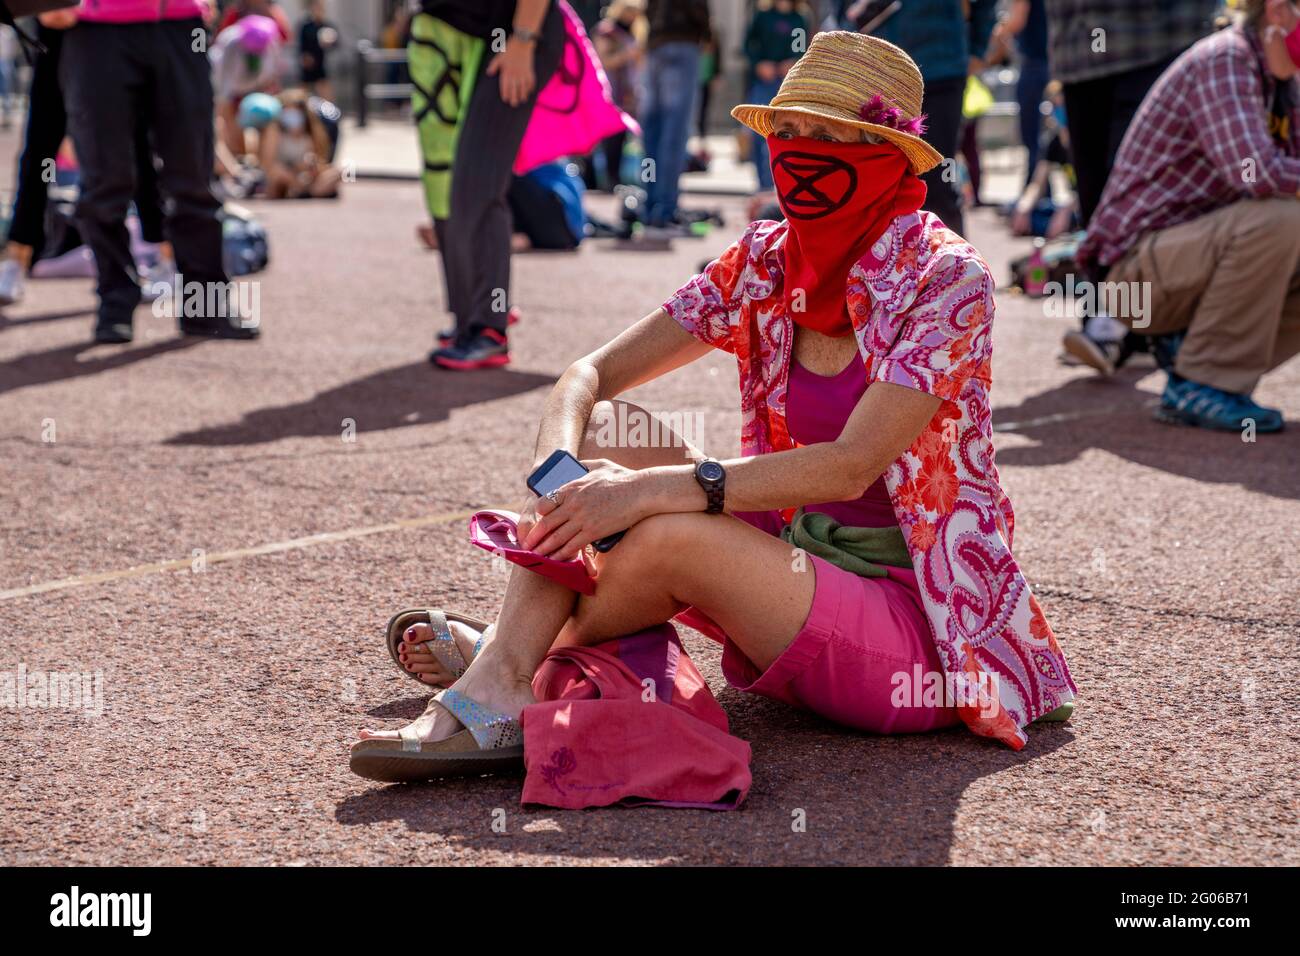 LONDON, UK - Extinction Rebellion activist sits on the pavement wearing colorful clothes and a face covering during a climate change protest Stock Photo